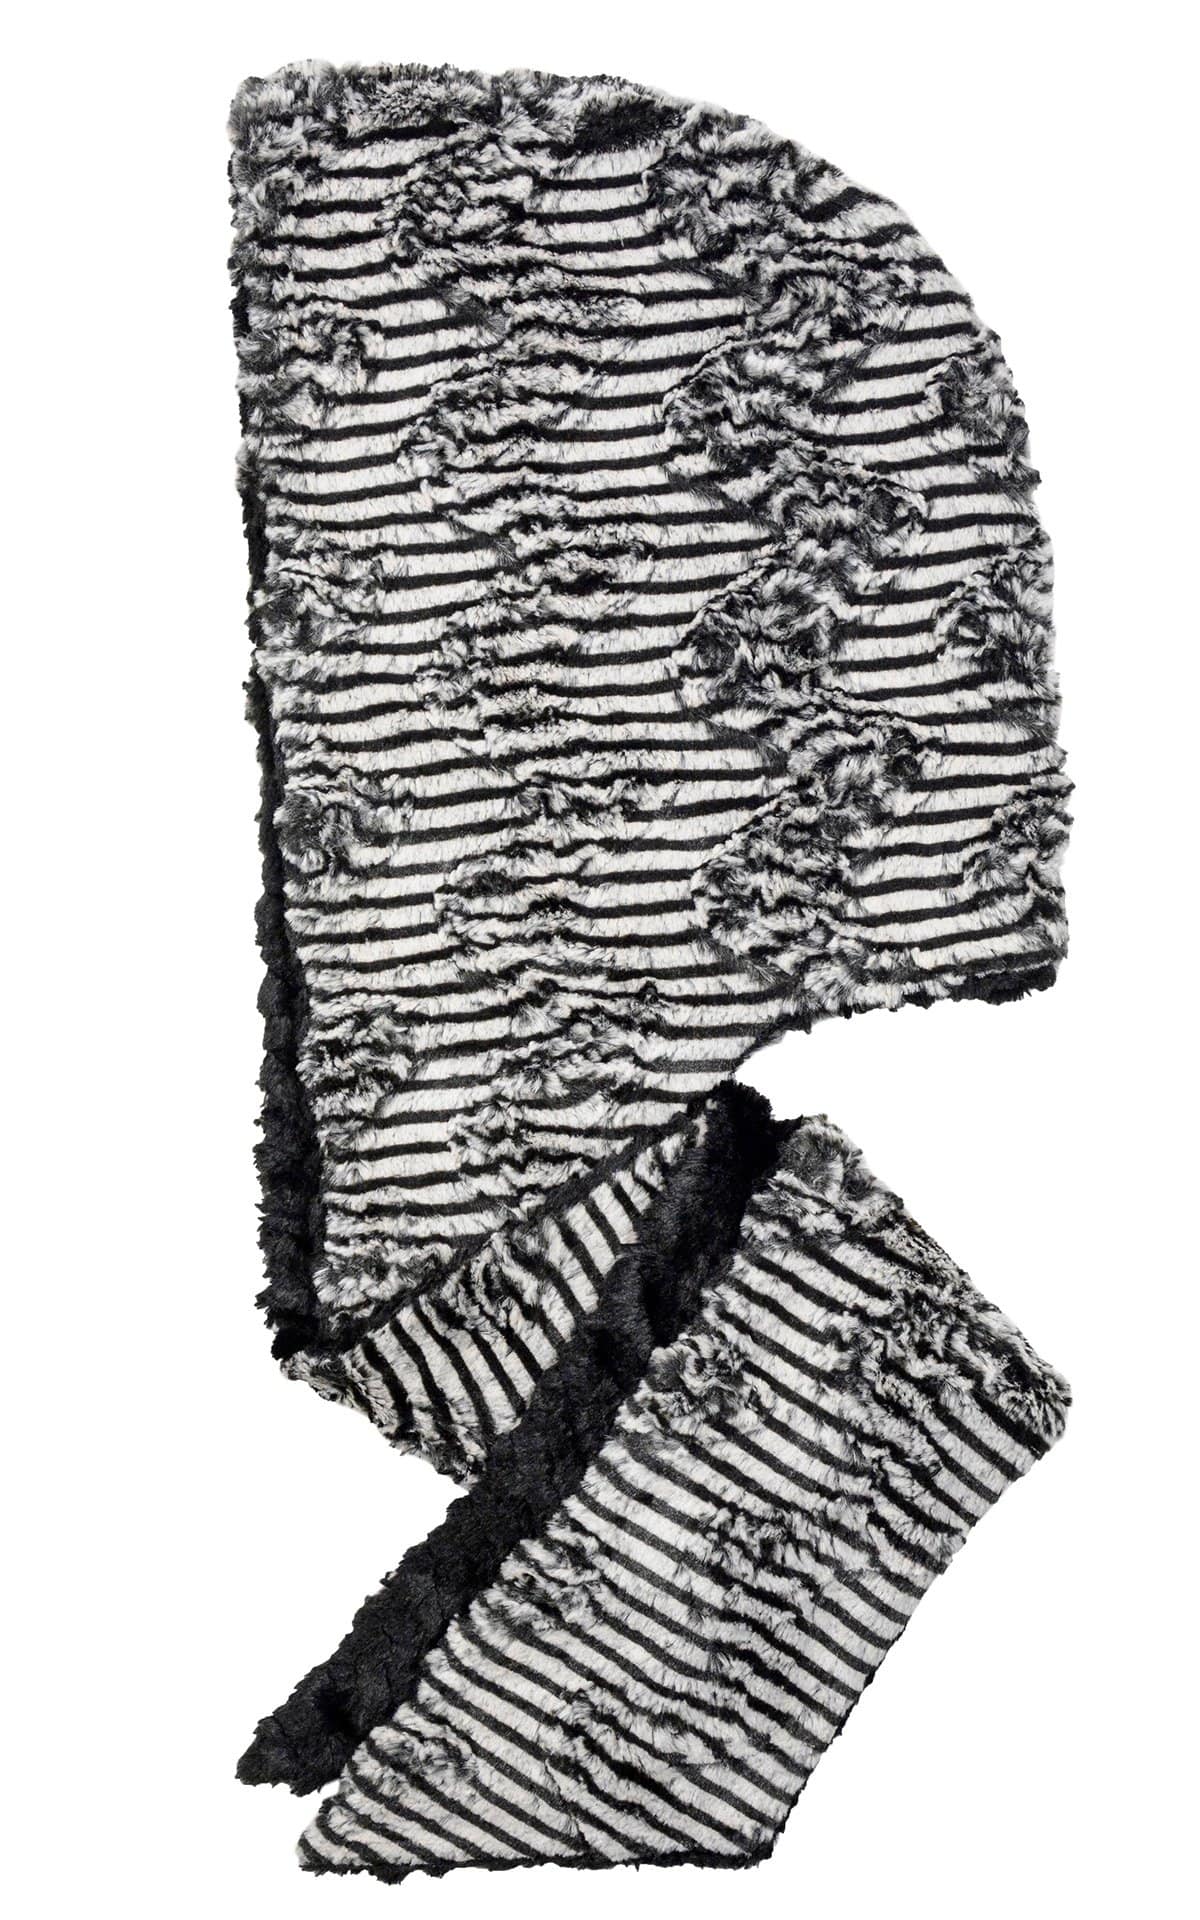 Hoody Scarf - Luxury Faux Fur in Tipsy Zebra with Cuddly Fur in Black (Sold Out!)